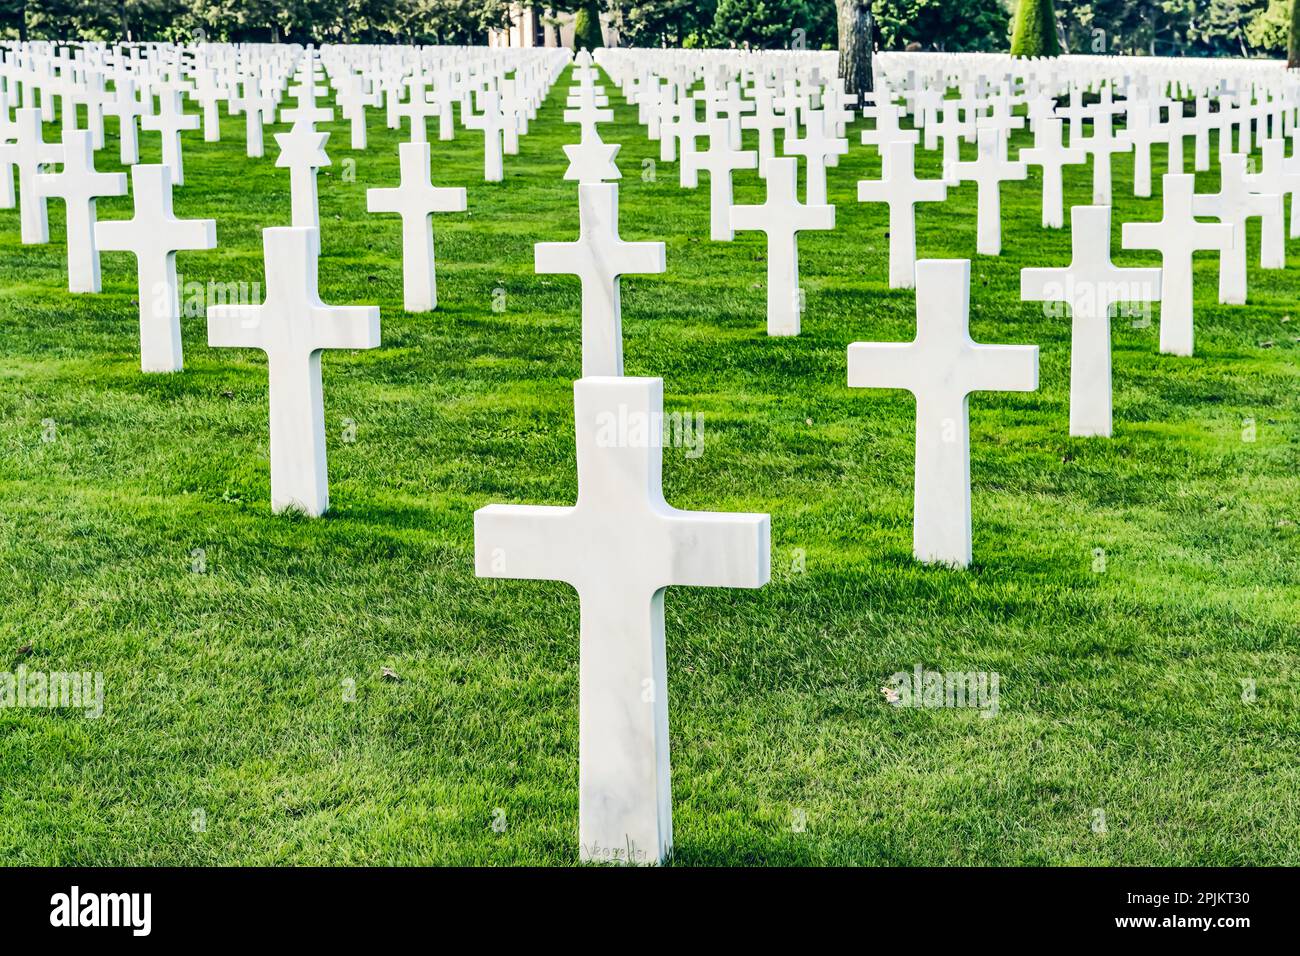 American Military Cemetery, Normandy, France. Graves of American soldiers killed in Normandy during World War 2 Stock Photo